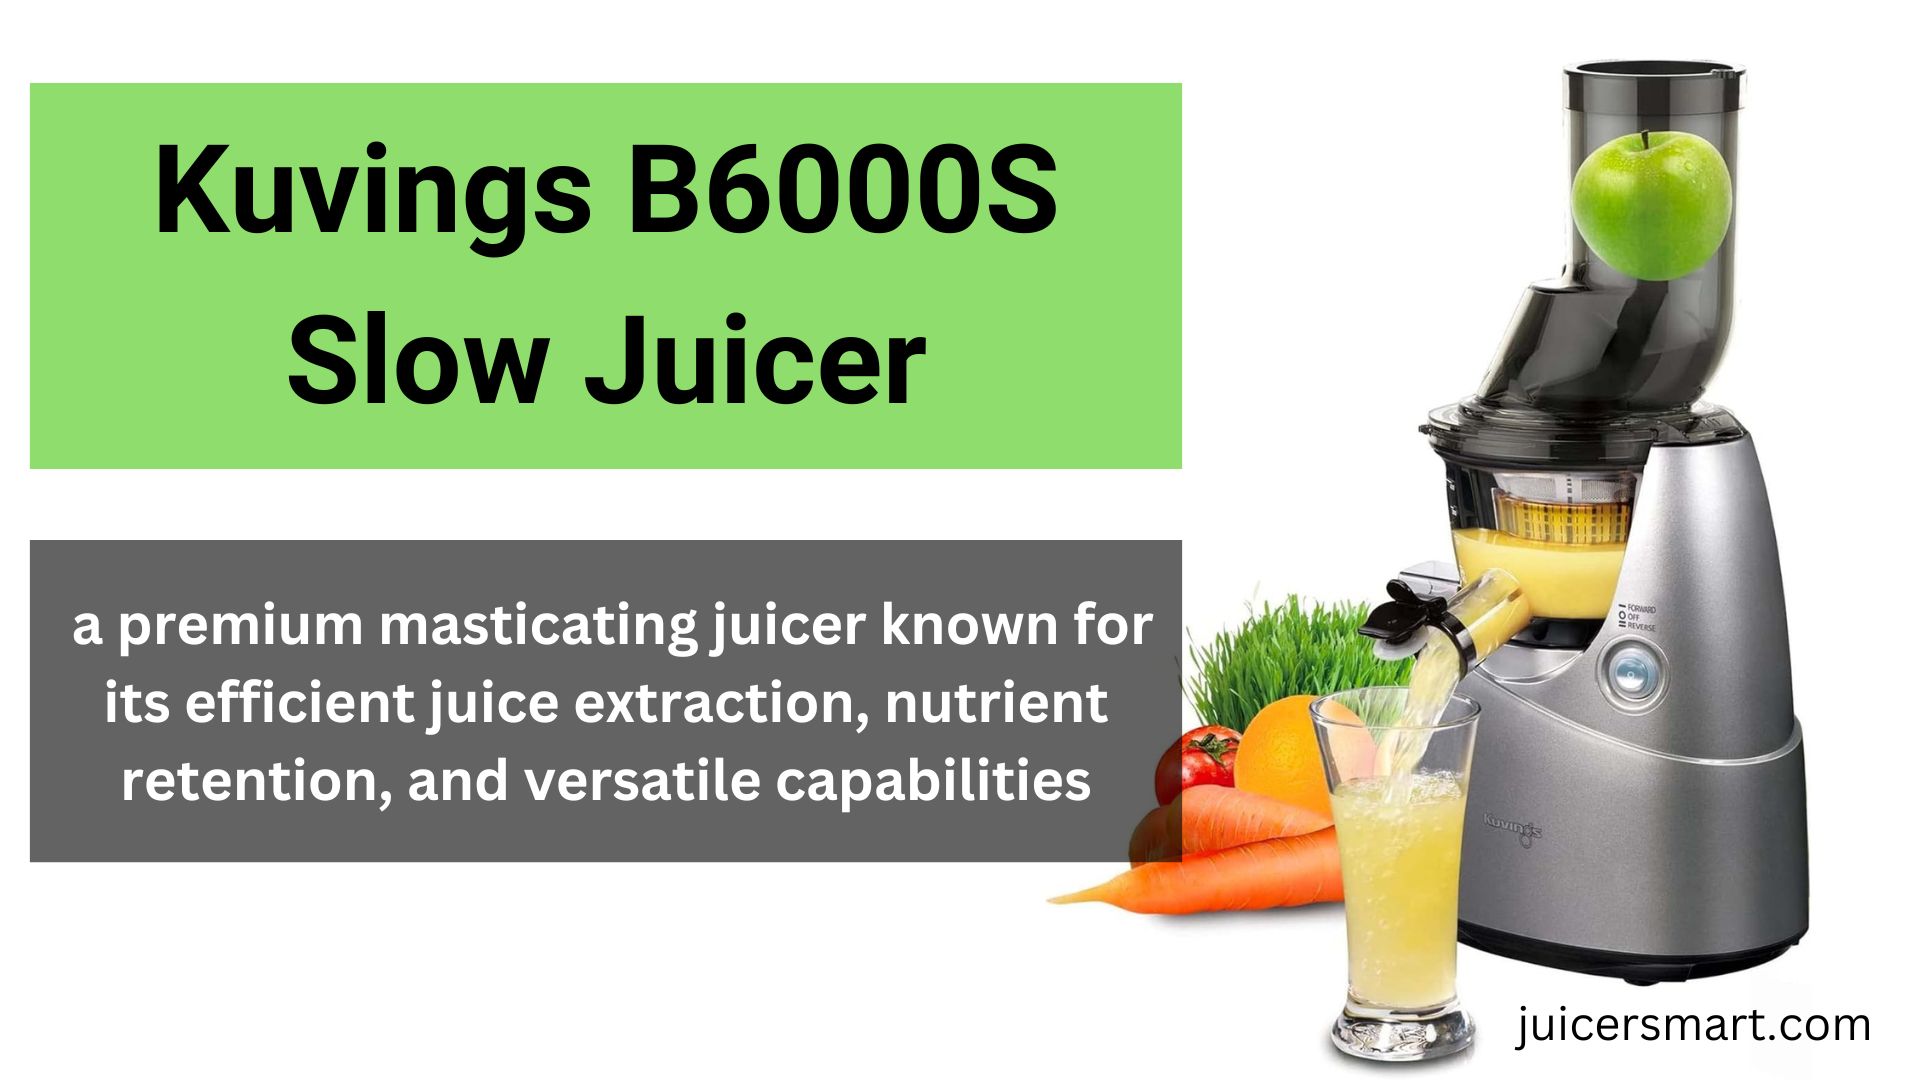 Kuvings B6000S Slow Juicer